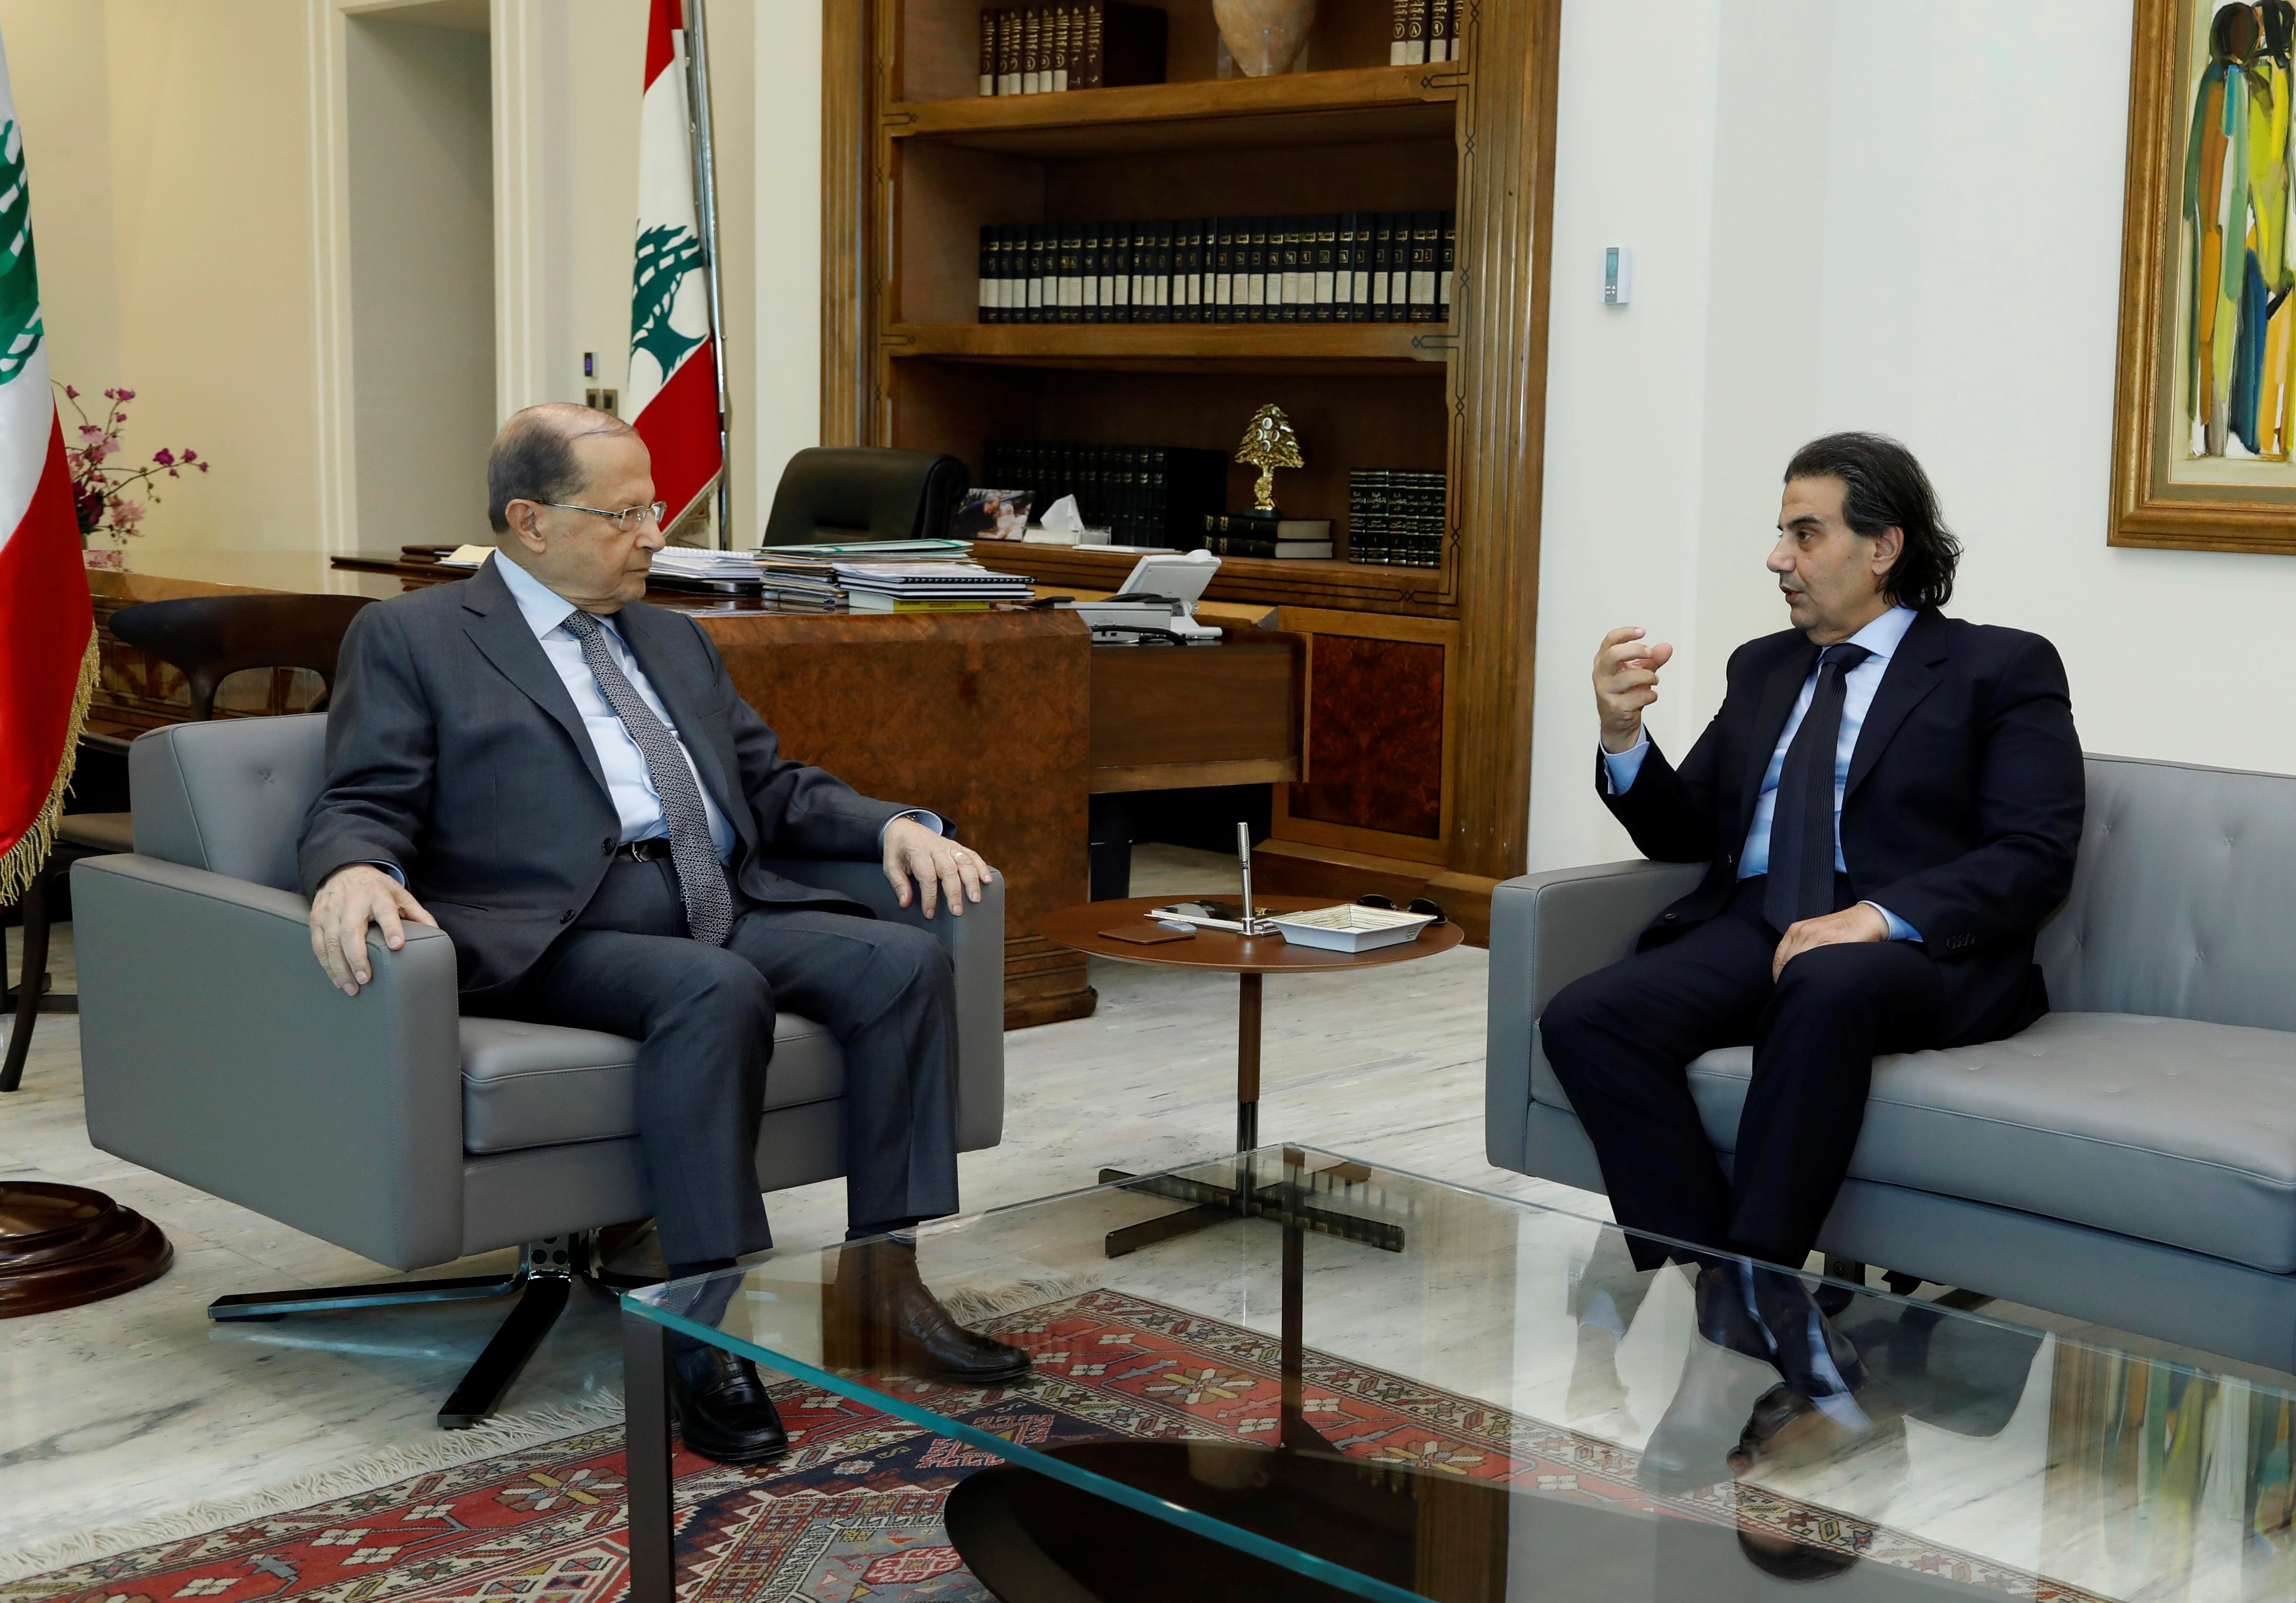 Lebanon's President Michel Aoun meets with Lebanese composer Samir Sfeir at the presidential palace in Baabda, Lebanon March 1, 2018. Picture taken March 1, 2018. Dalati Nohra/Handout via REUTERS ATTENTION EDITORS - THIS IMAGE WAS PROVIDED BY A THIRD PARTY